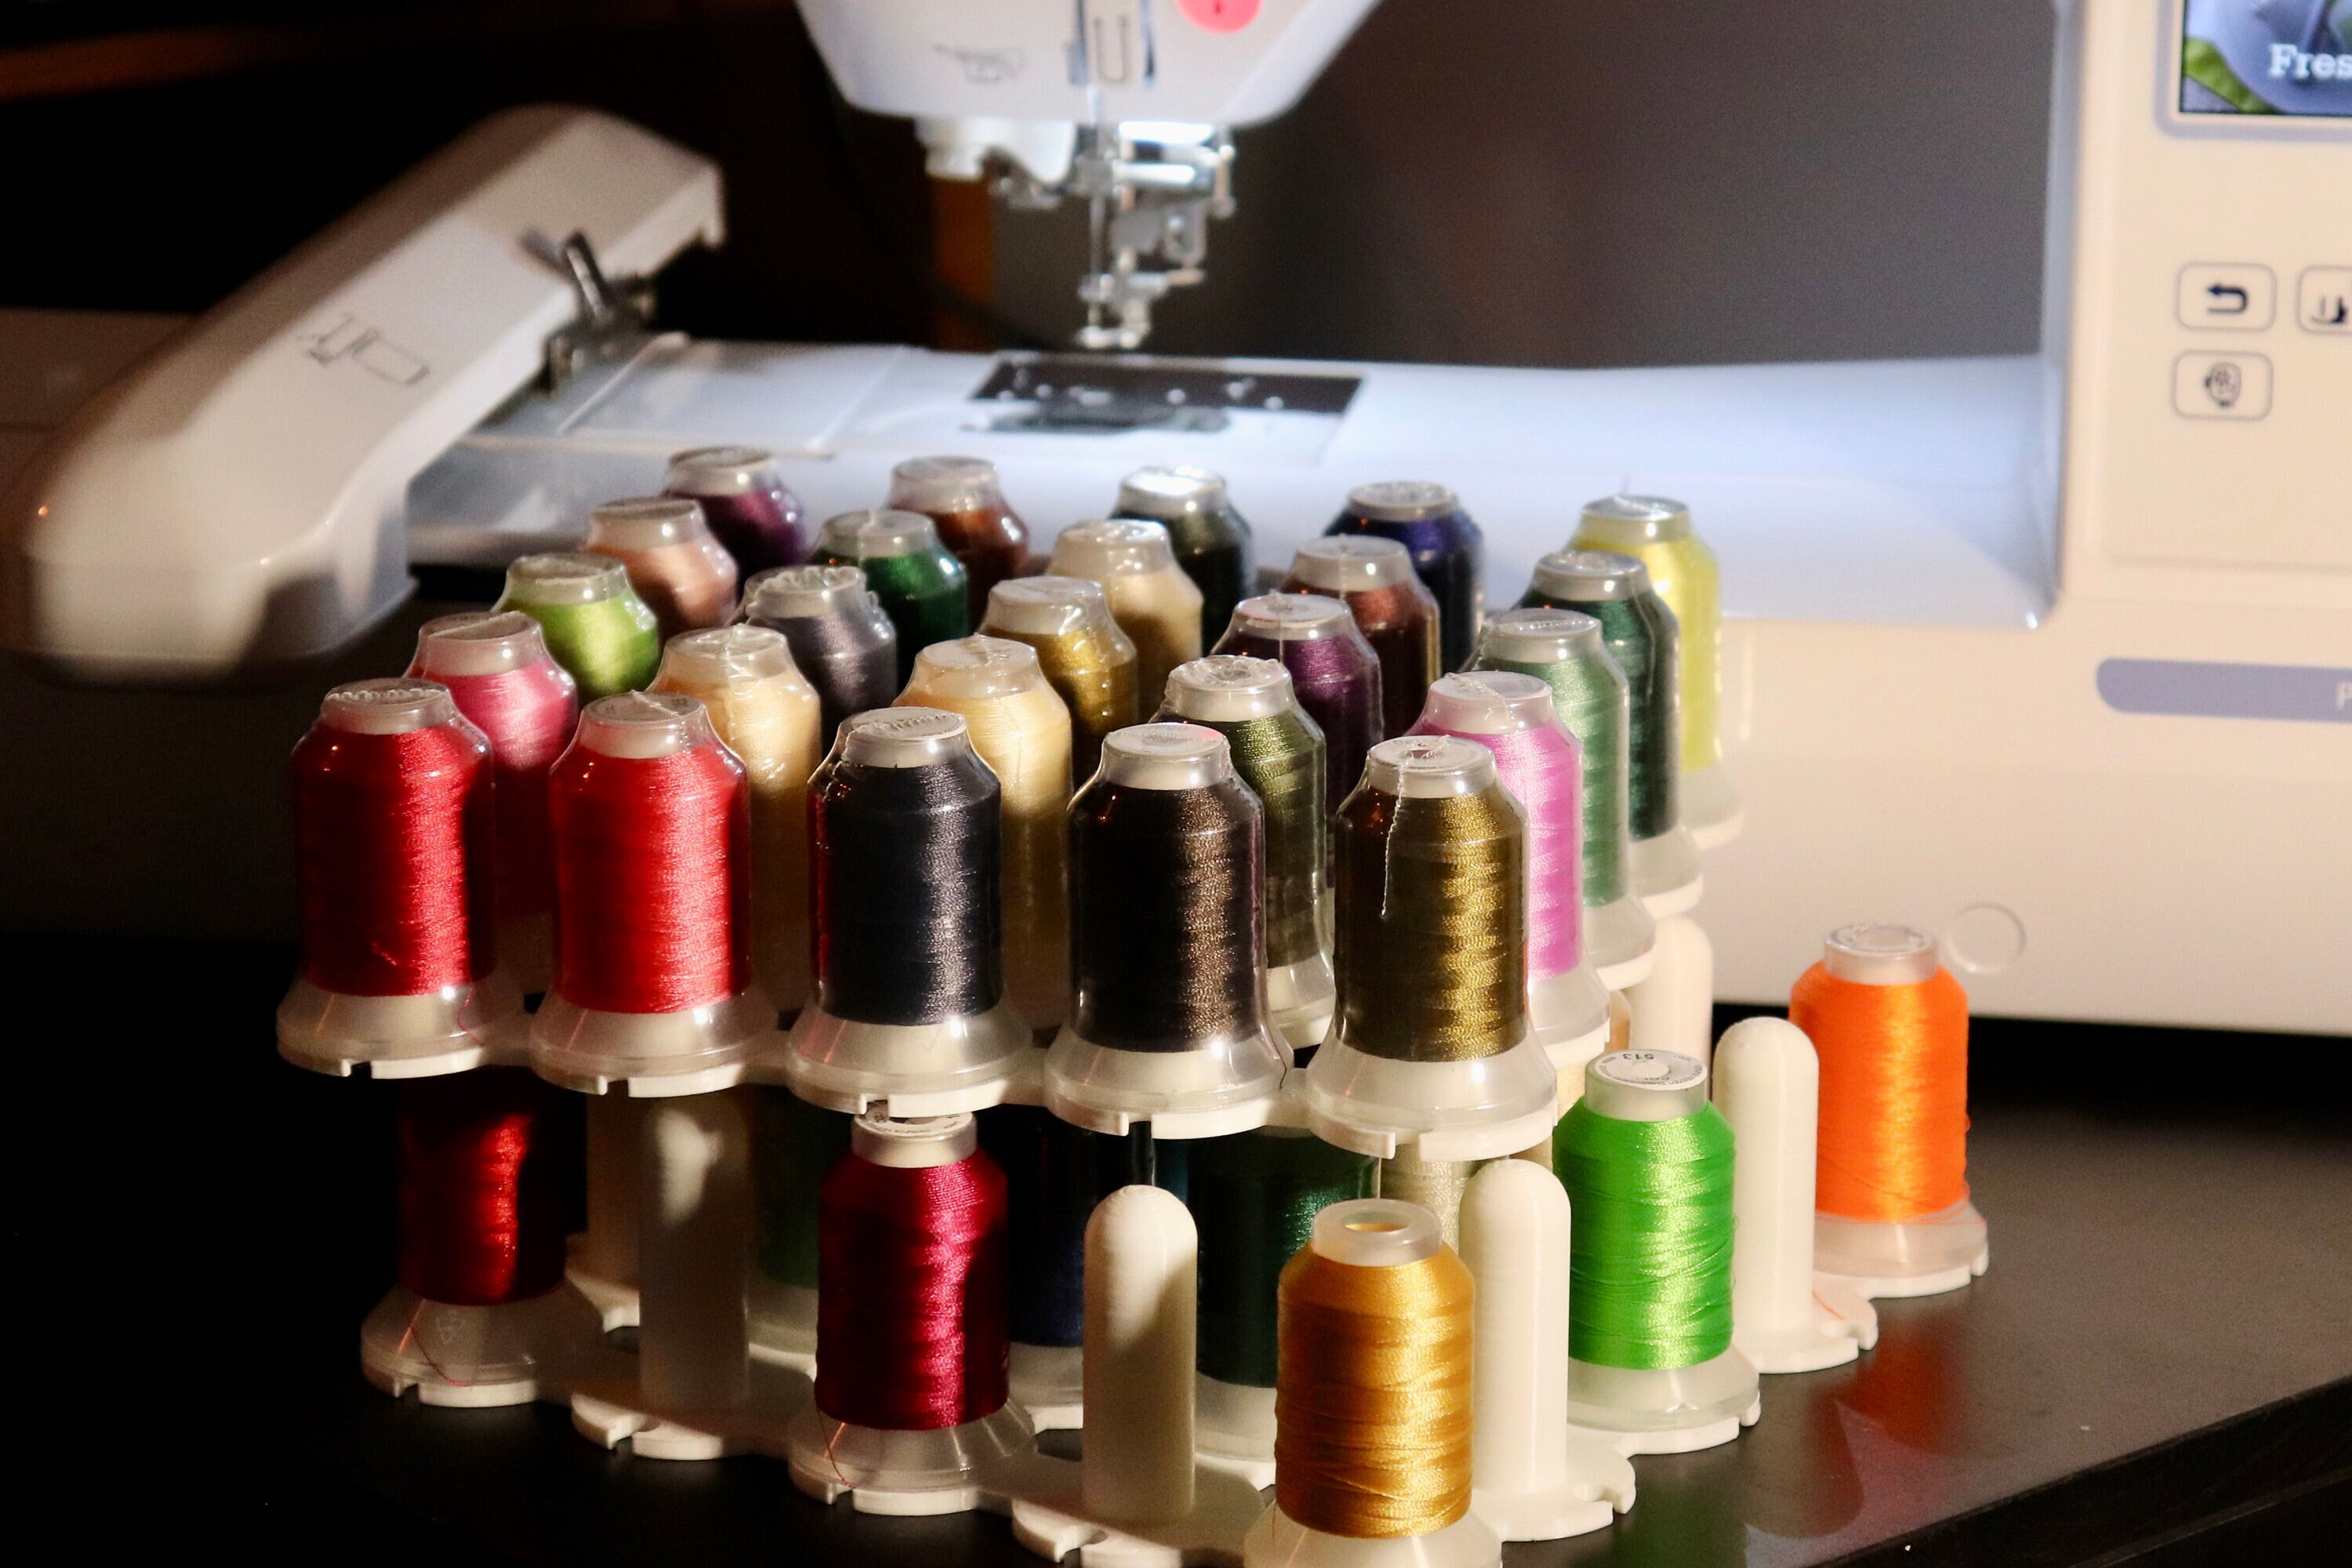 New brothread 25 Colors Variegated Polyester Embroidery Machine Thread Kit  500M (550Y) 